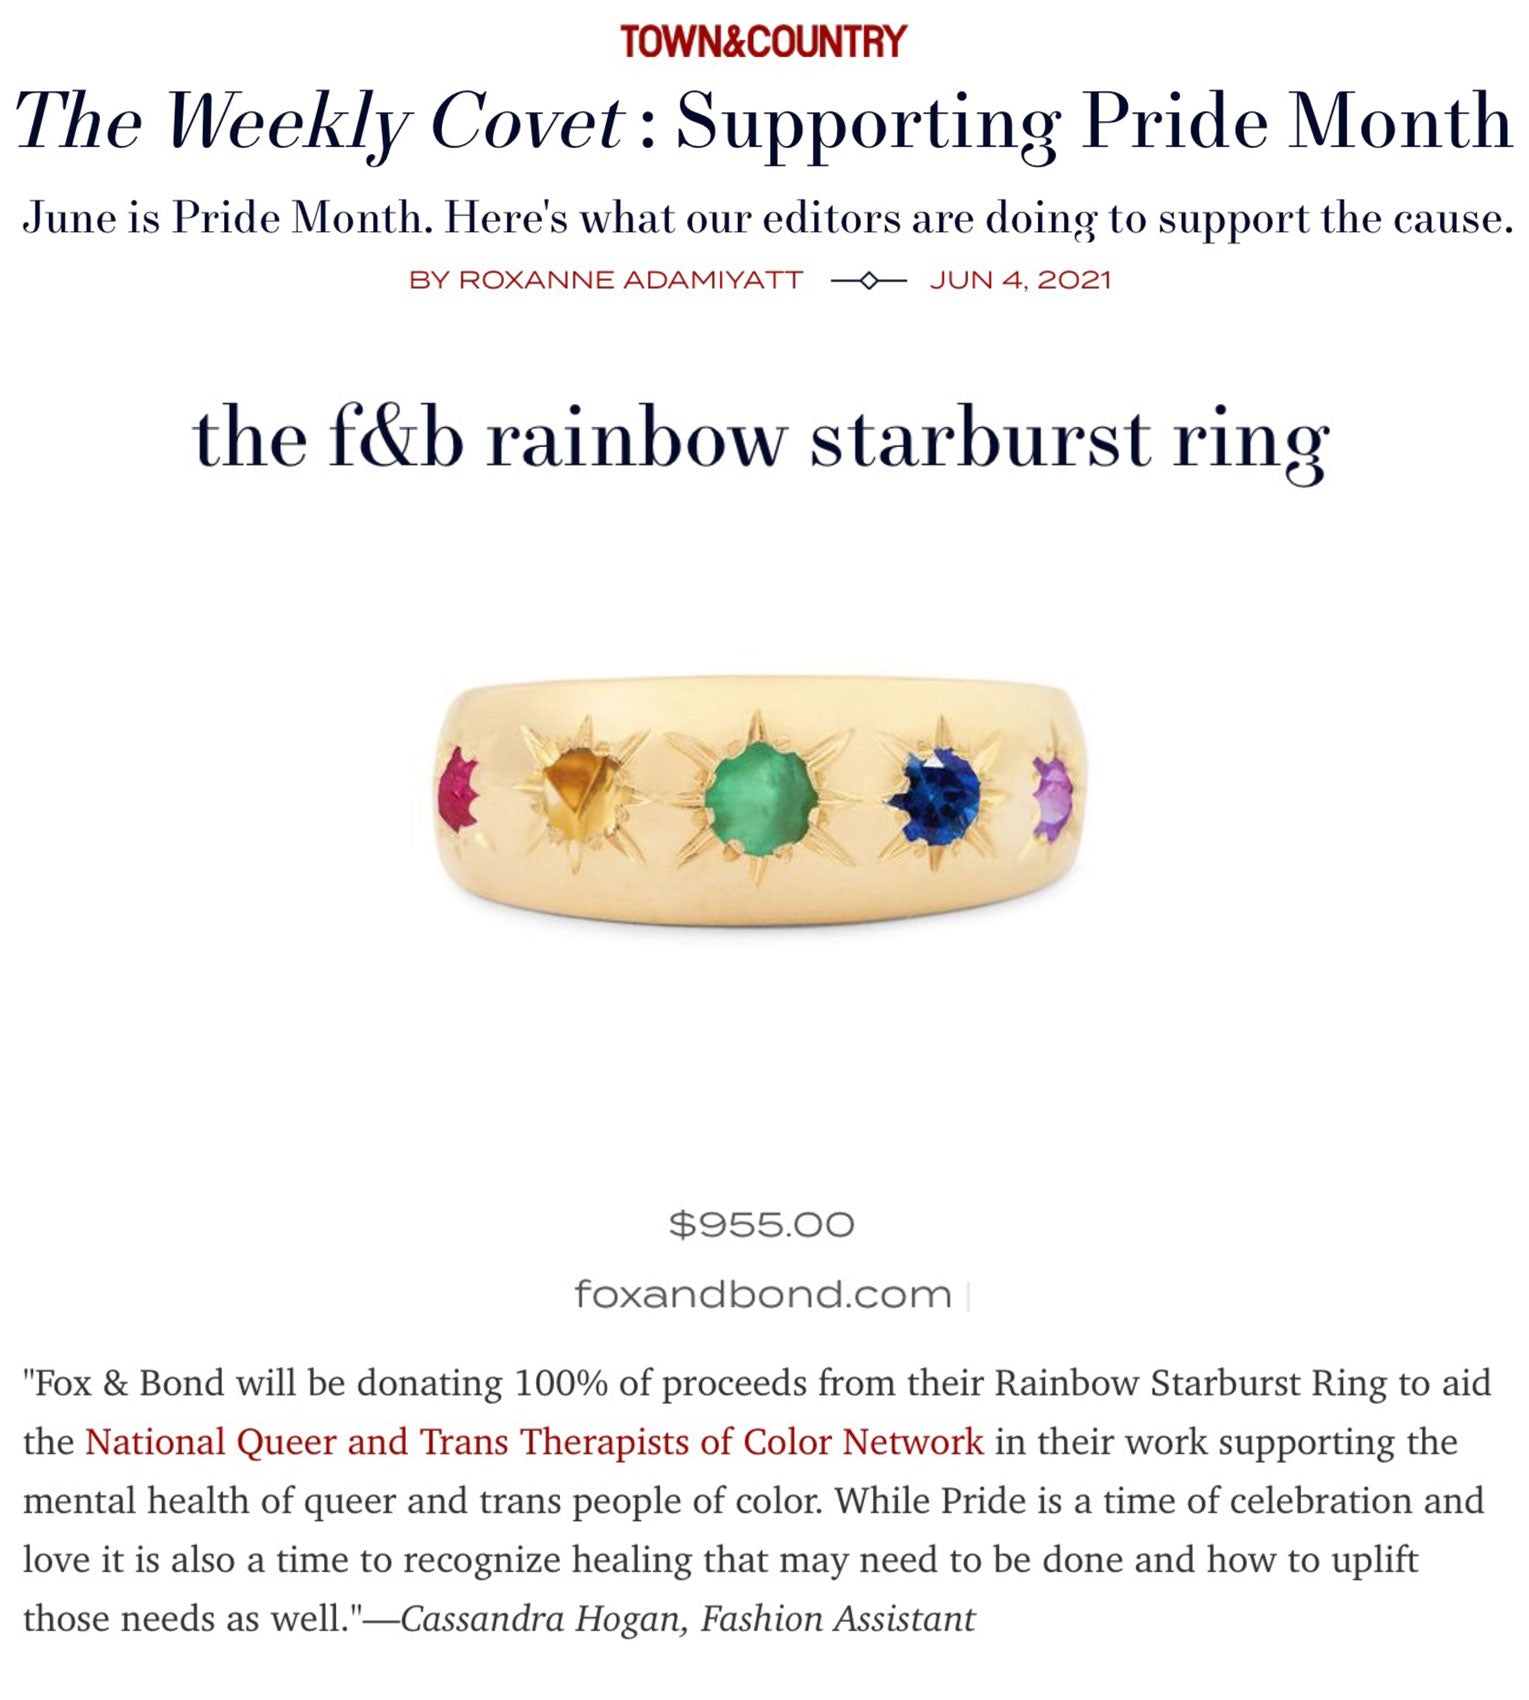 Town & Country: The Weekly Covet, Supporting Pride Month